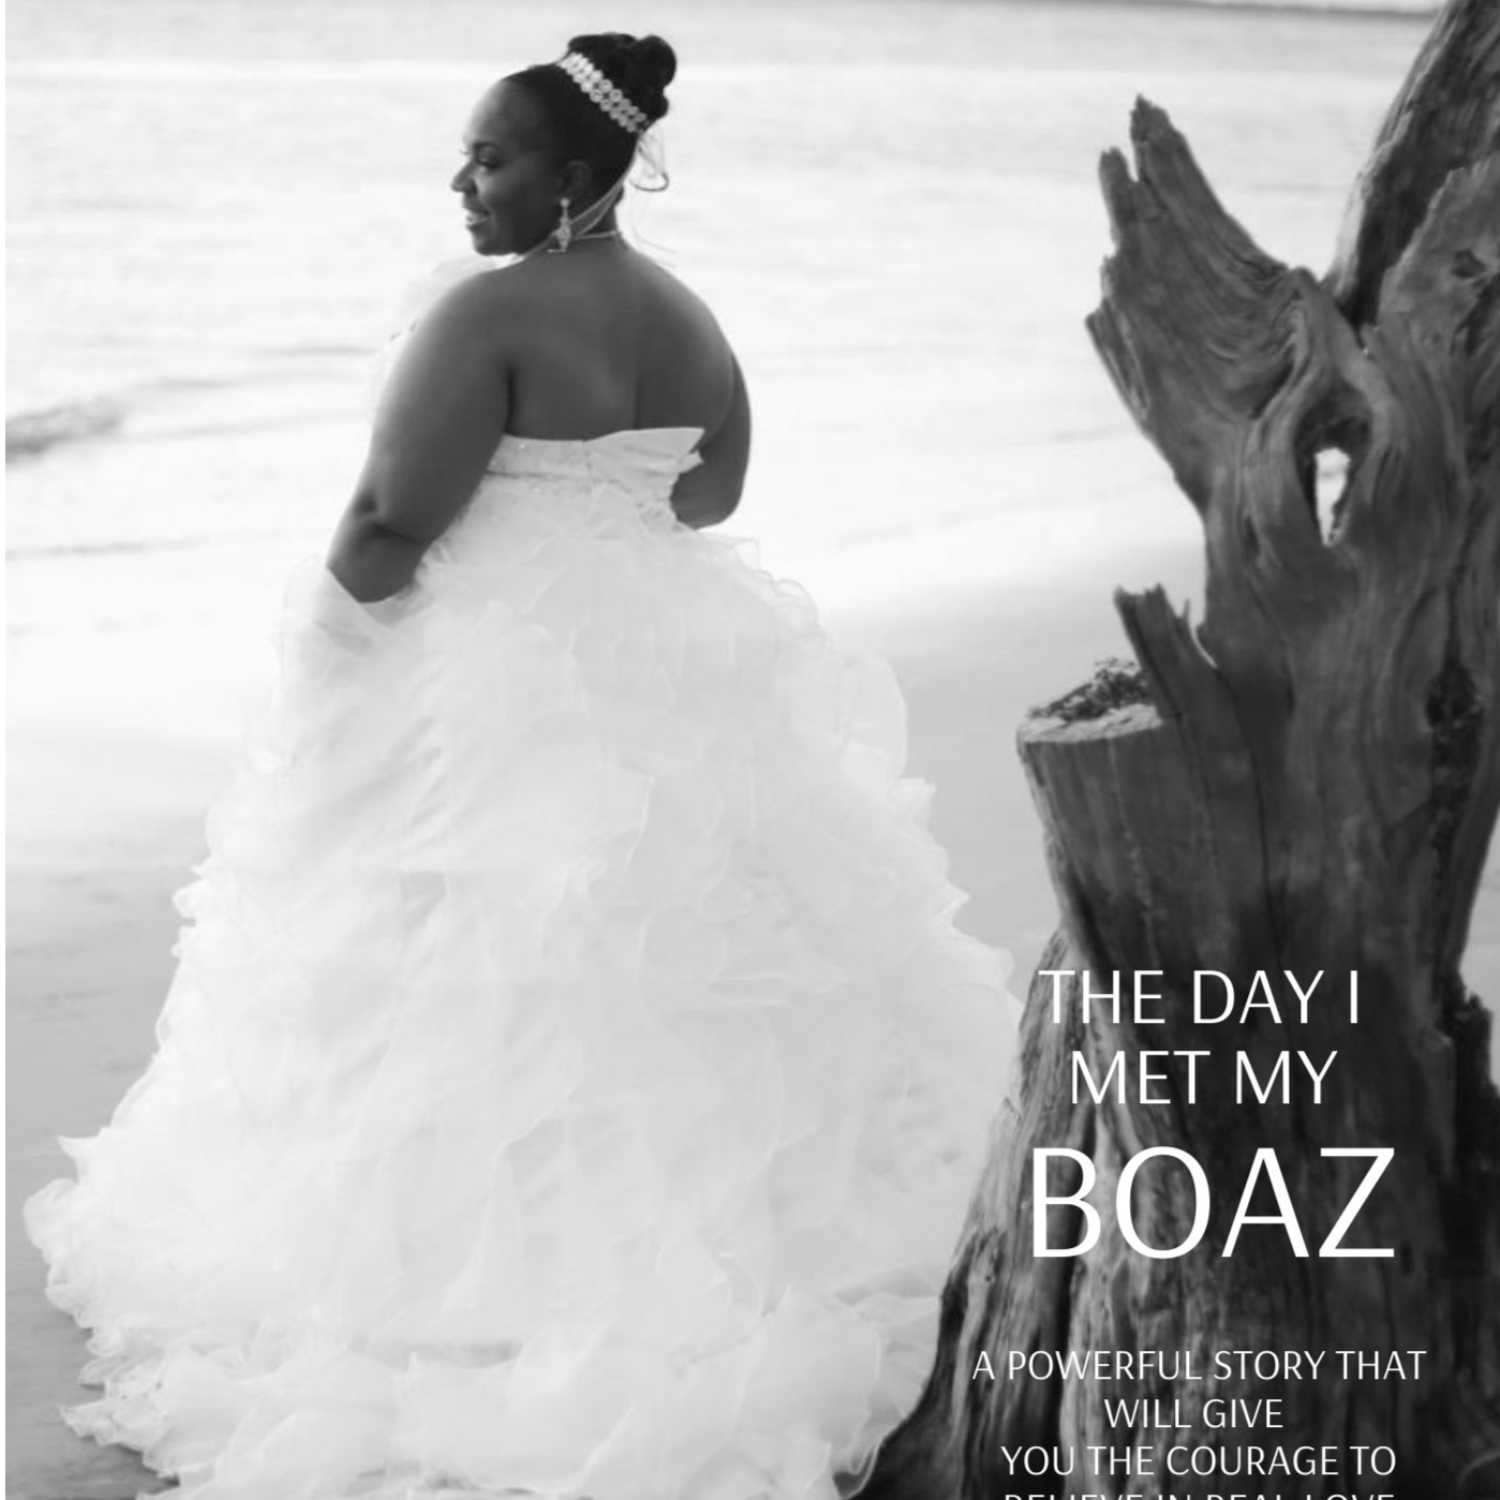 Episode 3: The Day I Met My Boaz - The Finale